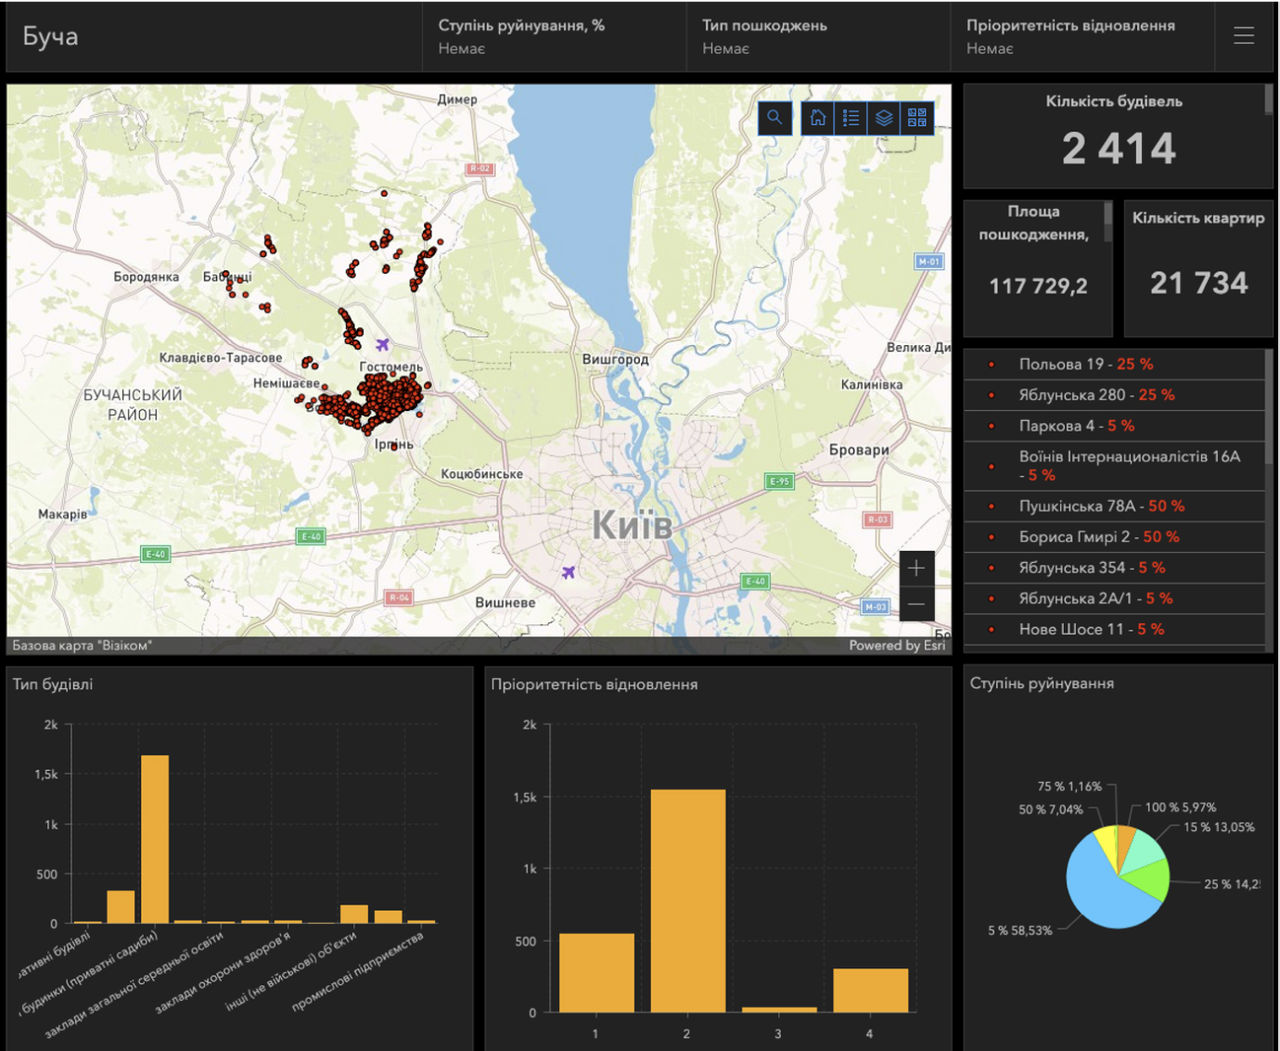 Dashboard of destruction in Bucha community. The map displays damaged buildings (educational, healthcare, cultural, sports, and other institutions - 2414 facilities total).